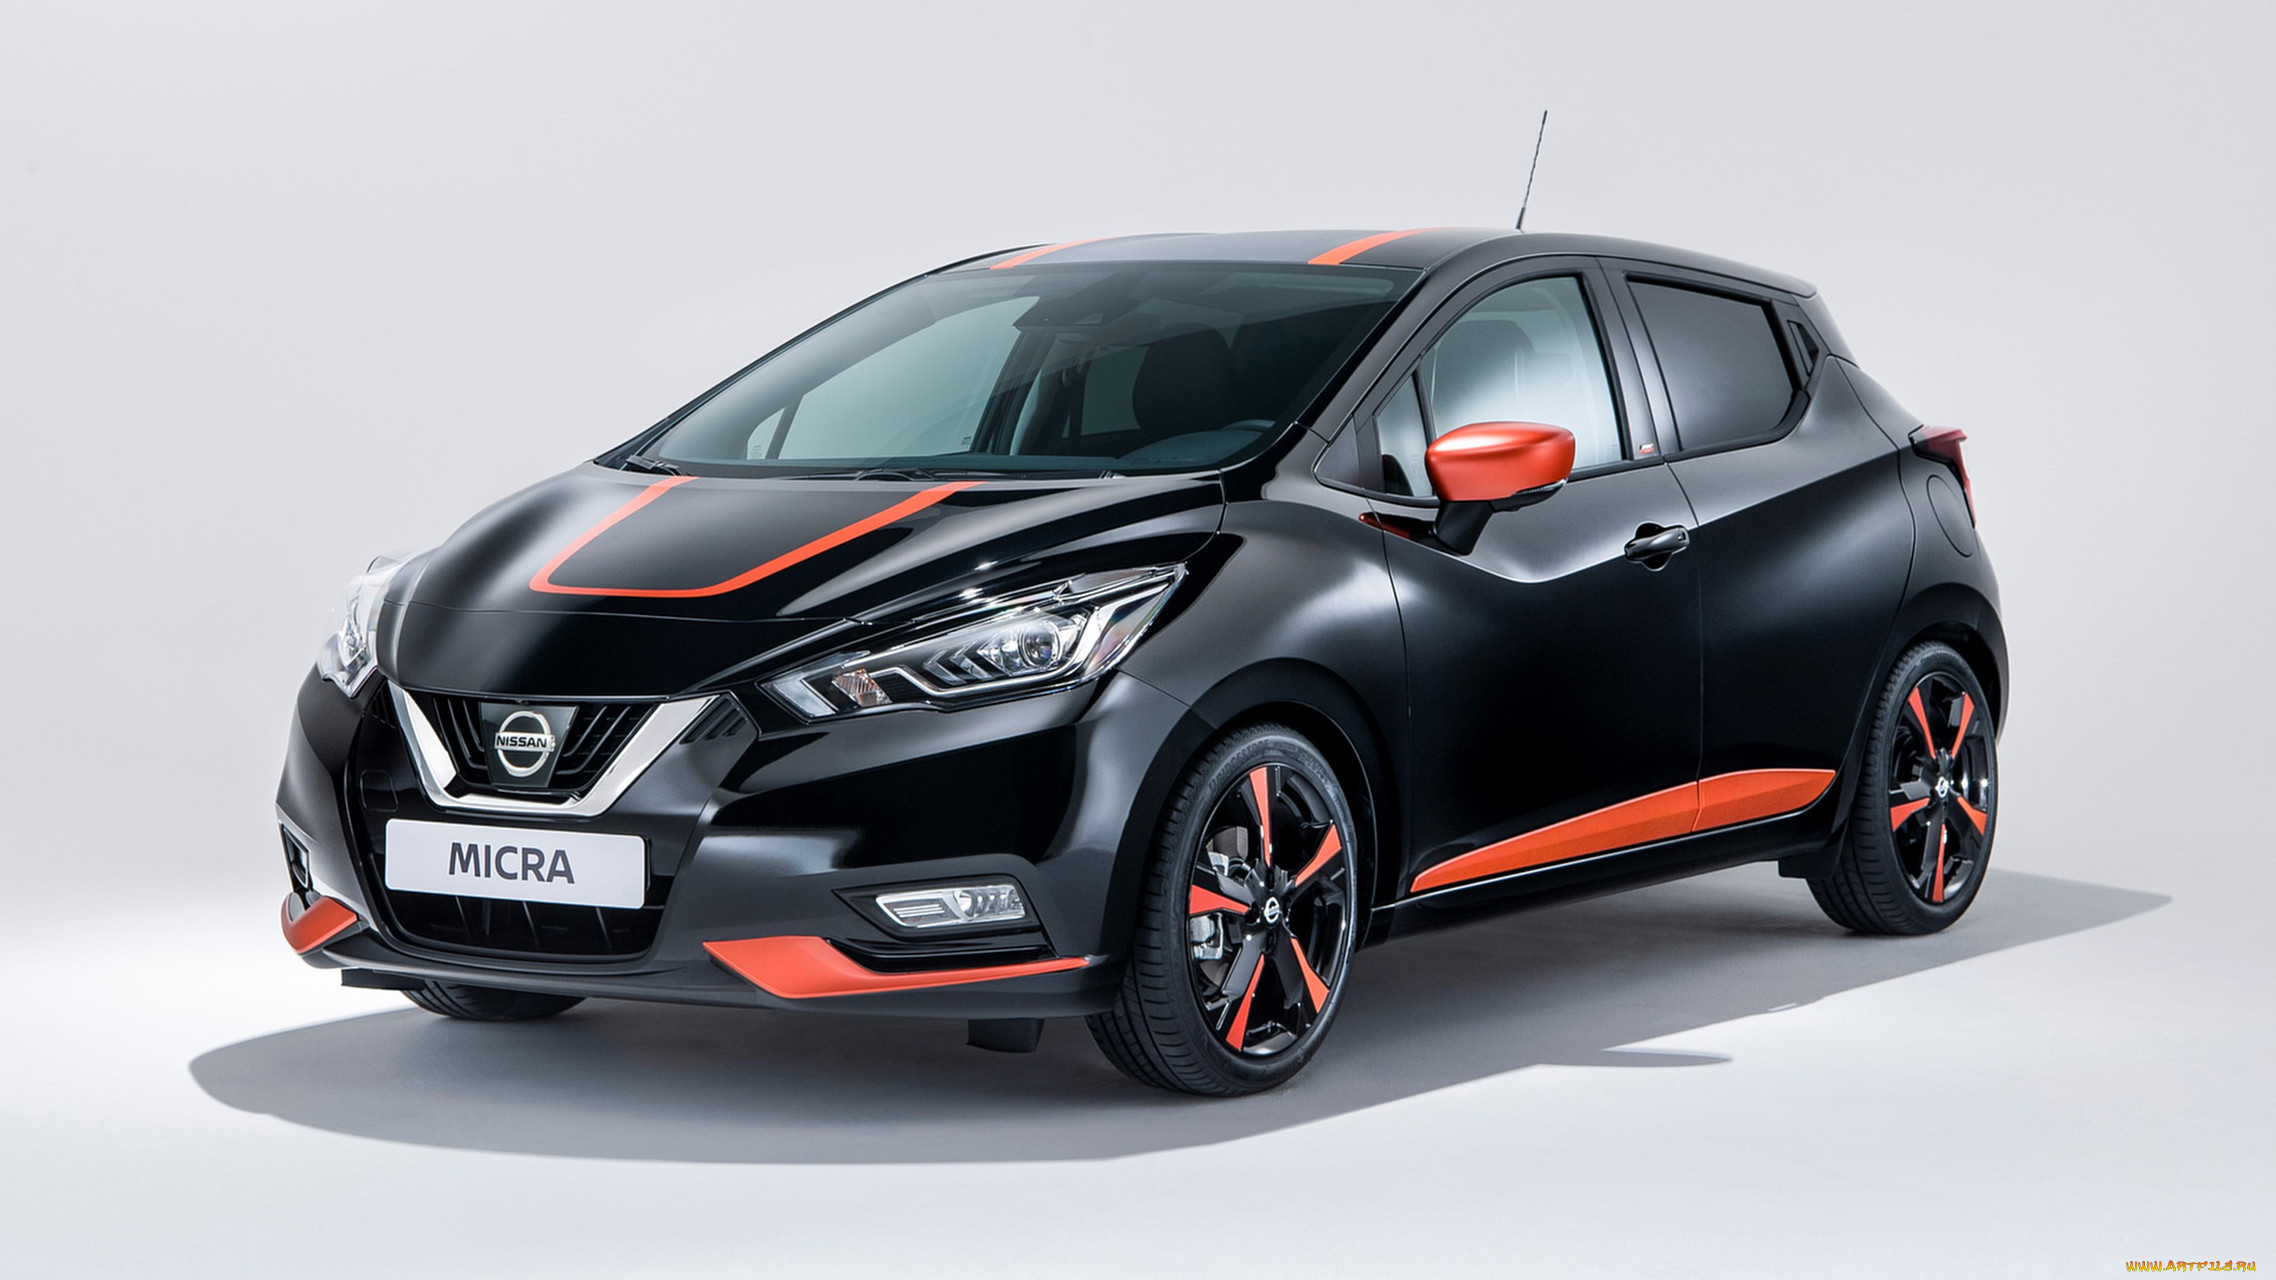 nissan micra bose personal edition 2017, , nissan, datsun, edition, personal, bose, 2017, micra